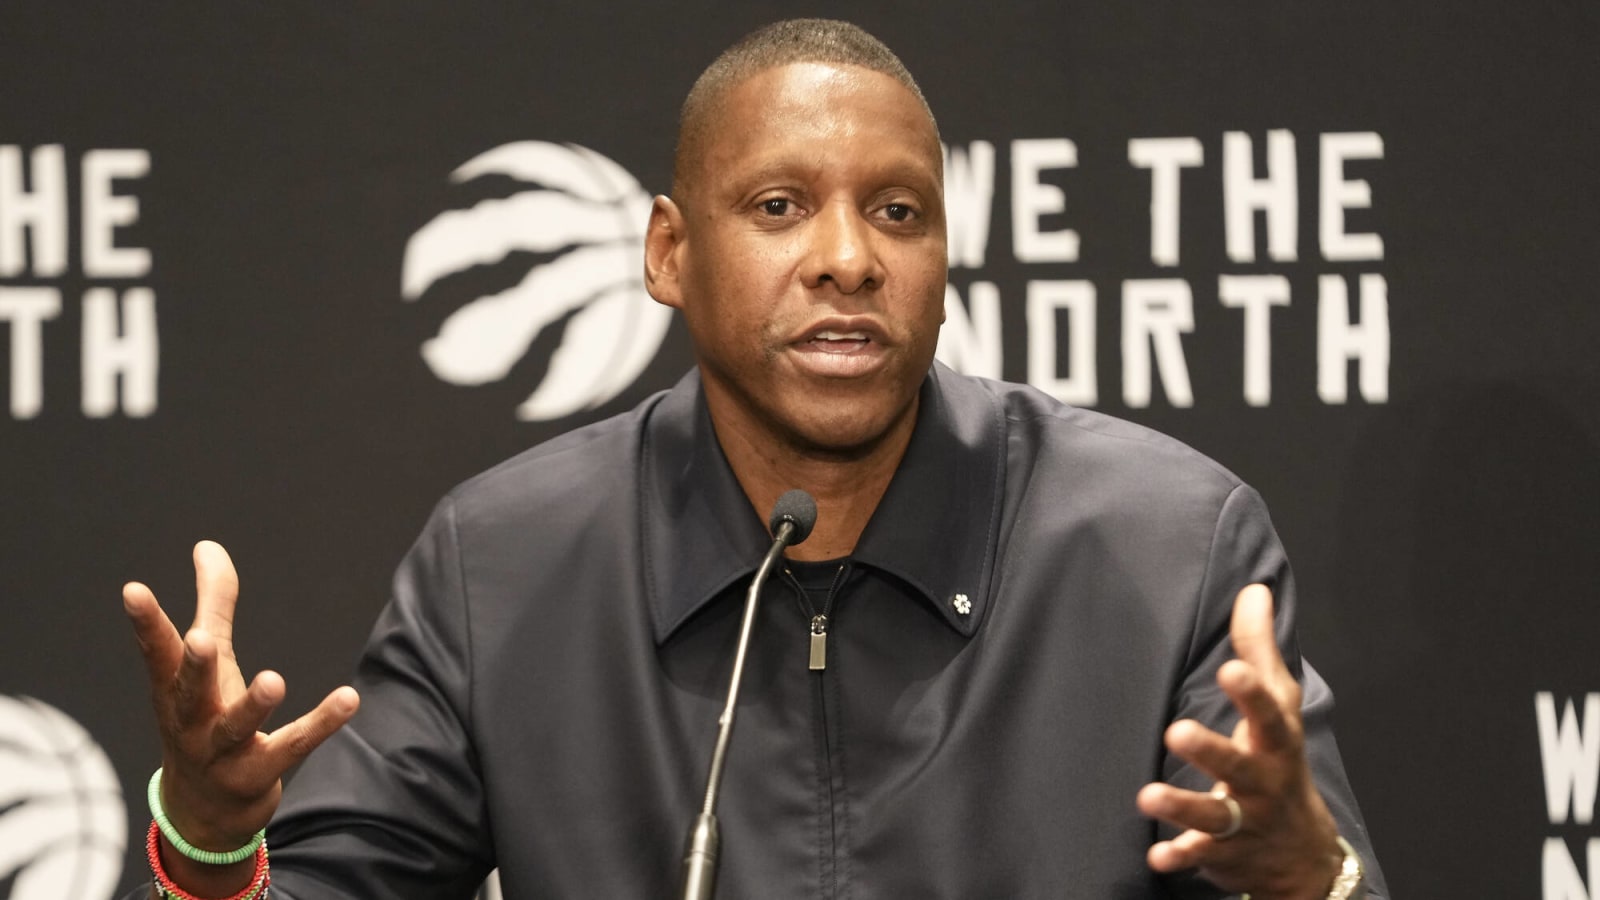  Masai Ujiri Comments On Ticket Prices Going Up